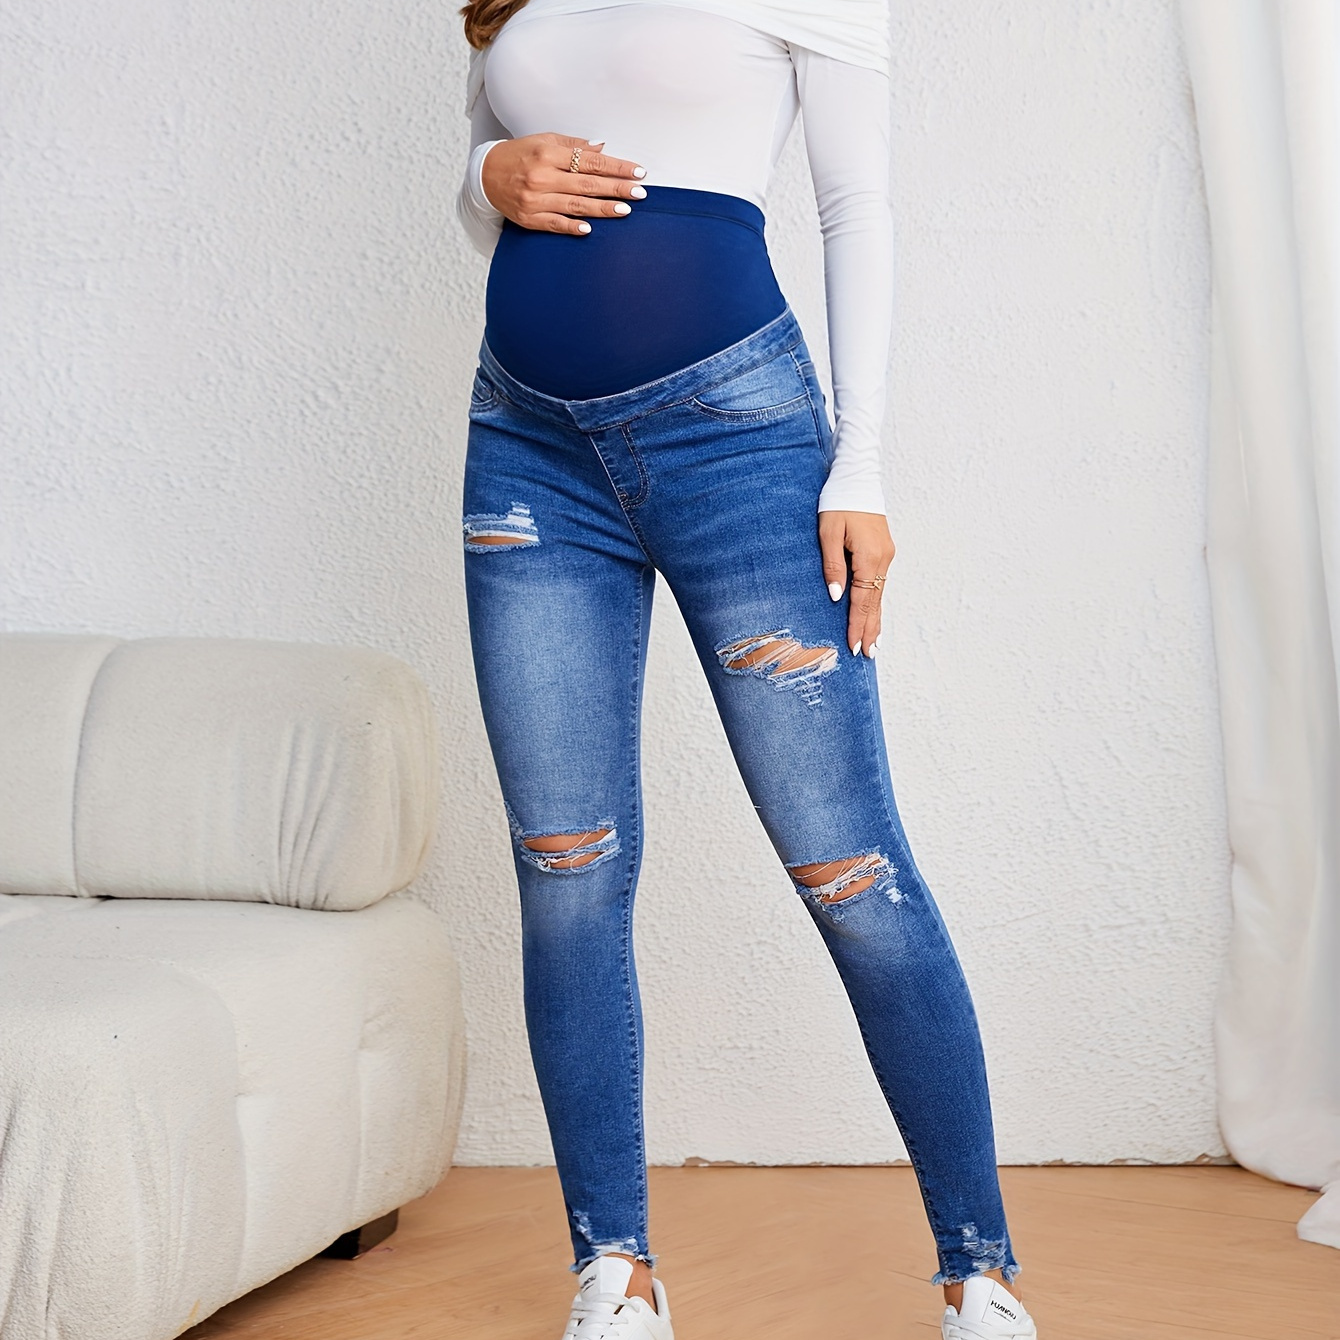 

Women's Stylish Ripped Skinny Maternity Jeans With Elastic Waistband, Comfort Fit Denim For Pregnant Women